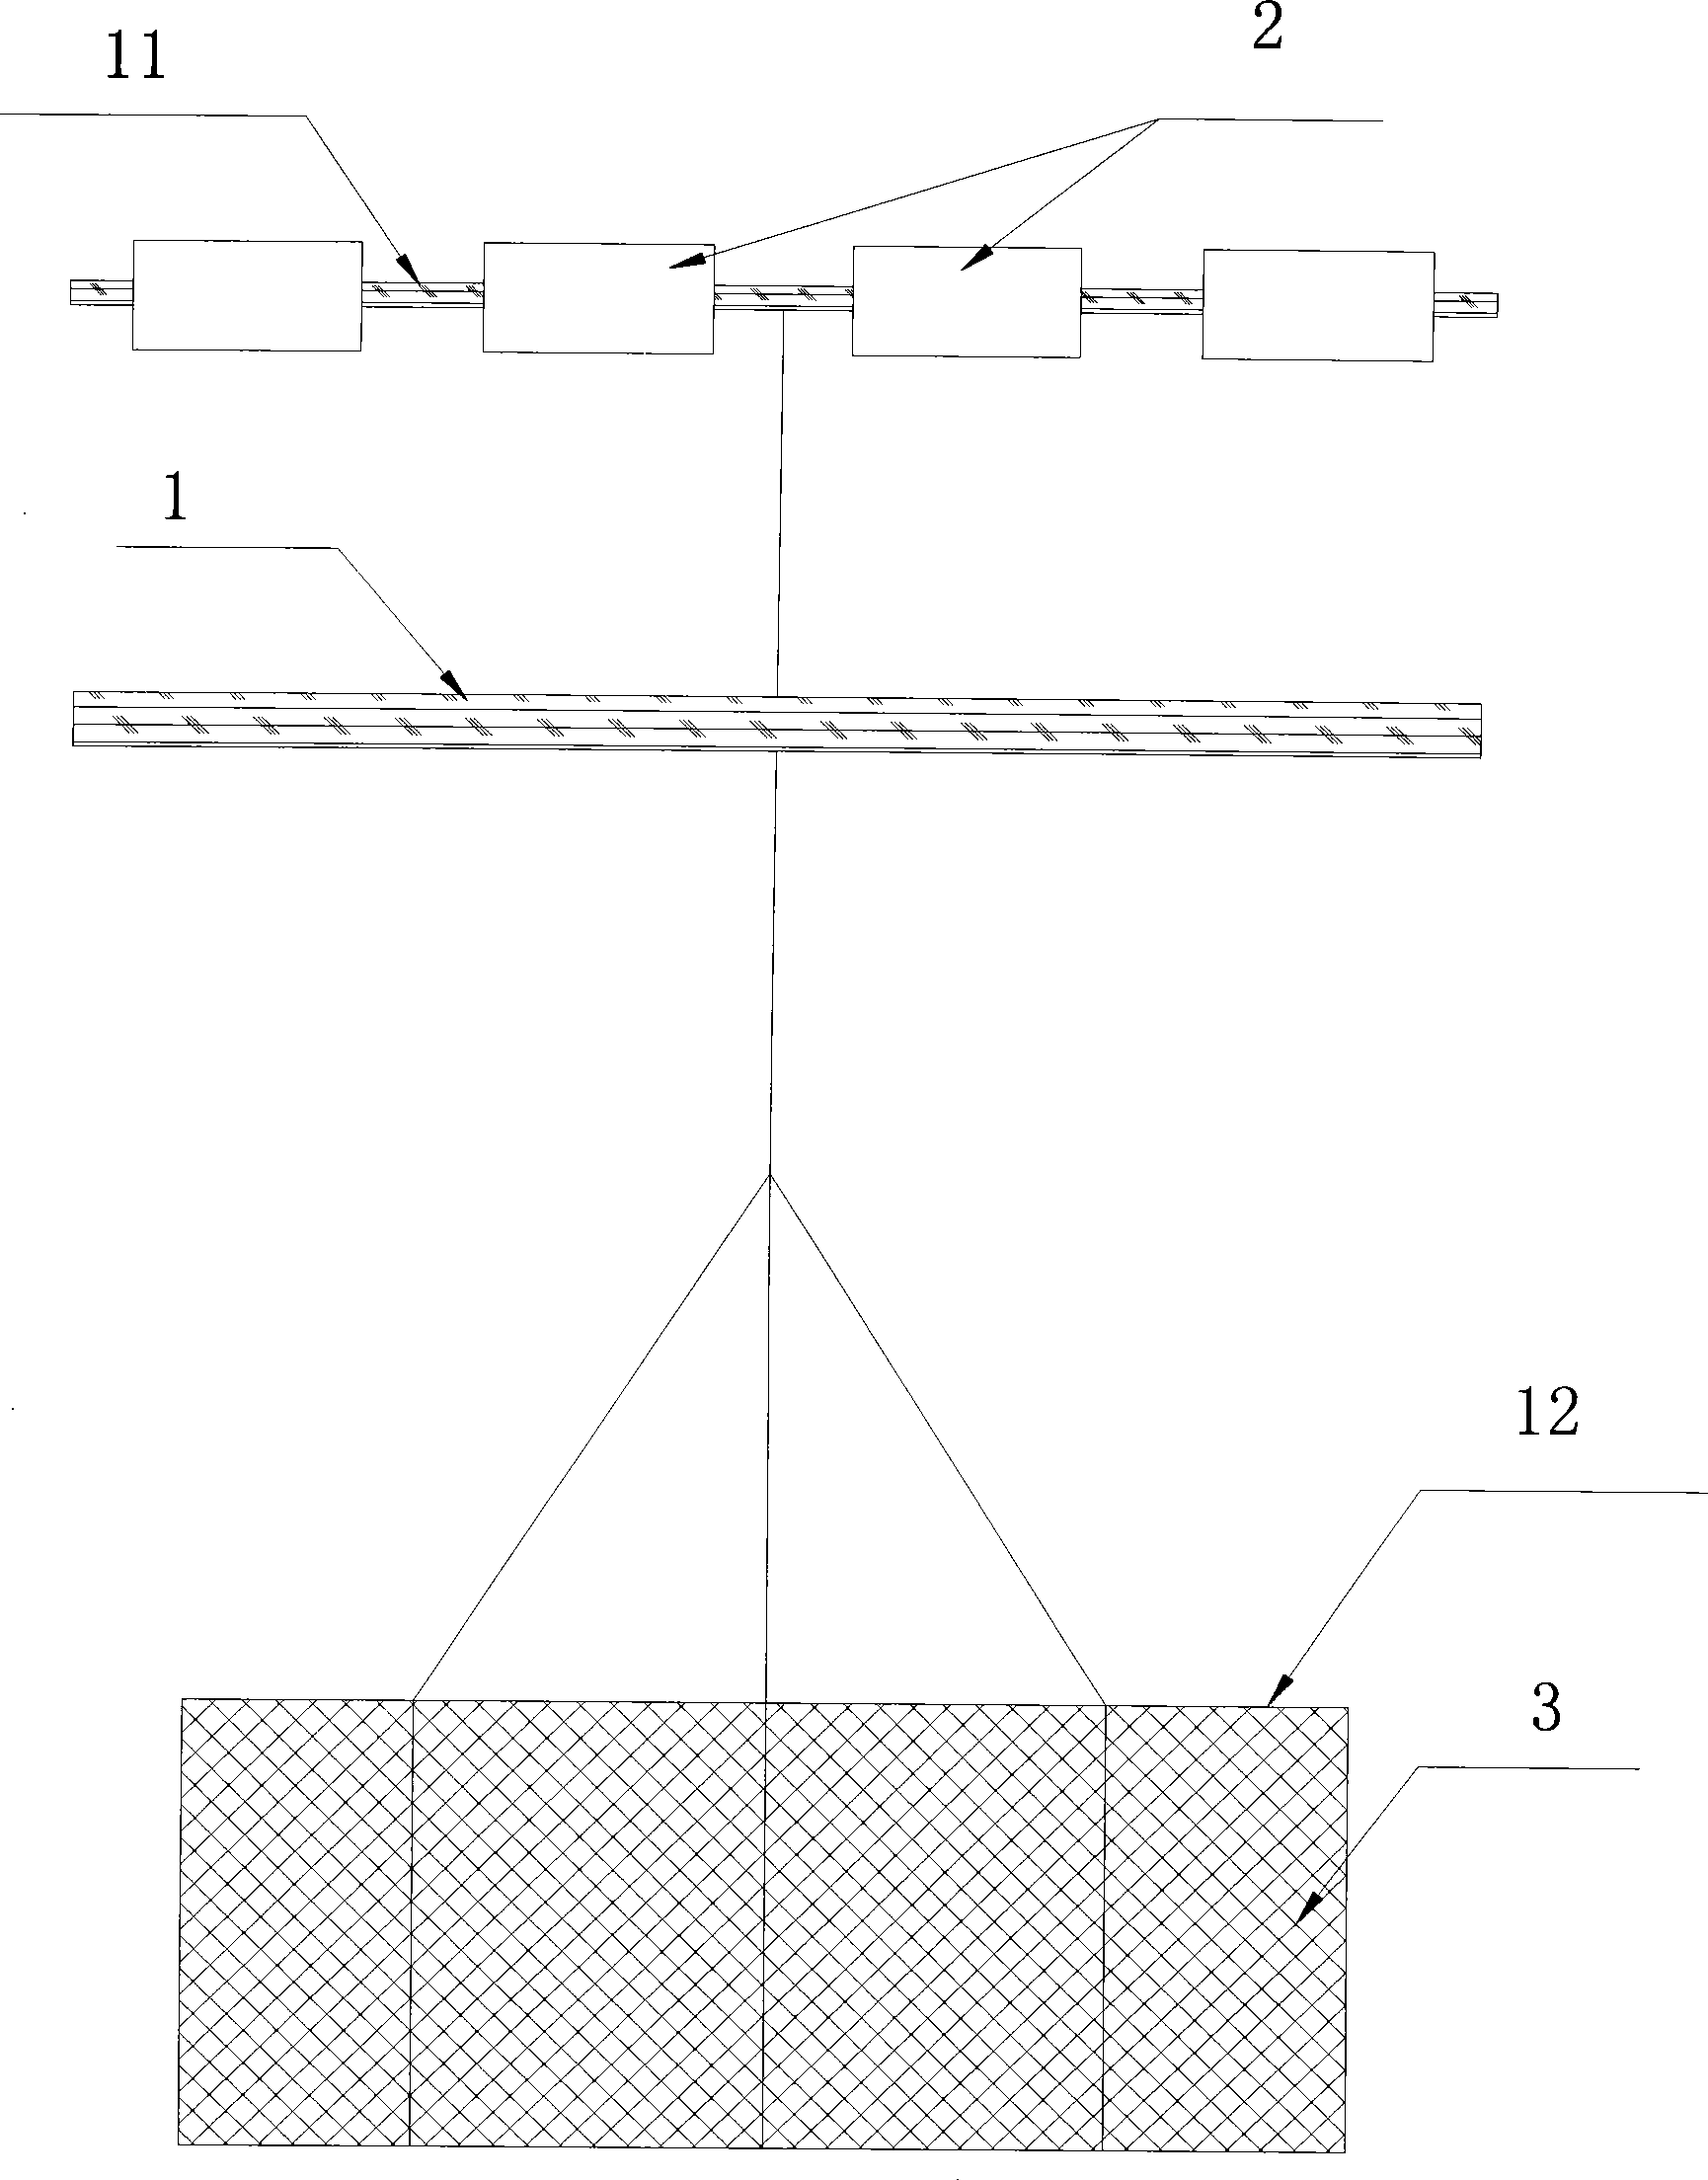 Moveable bottom-raft type cultivation system